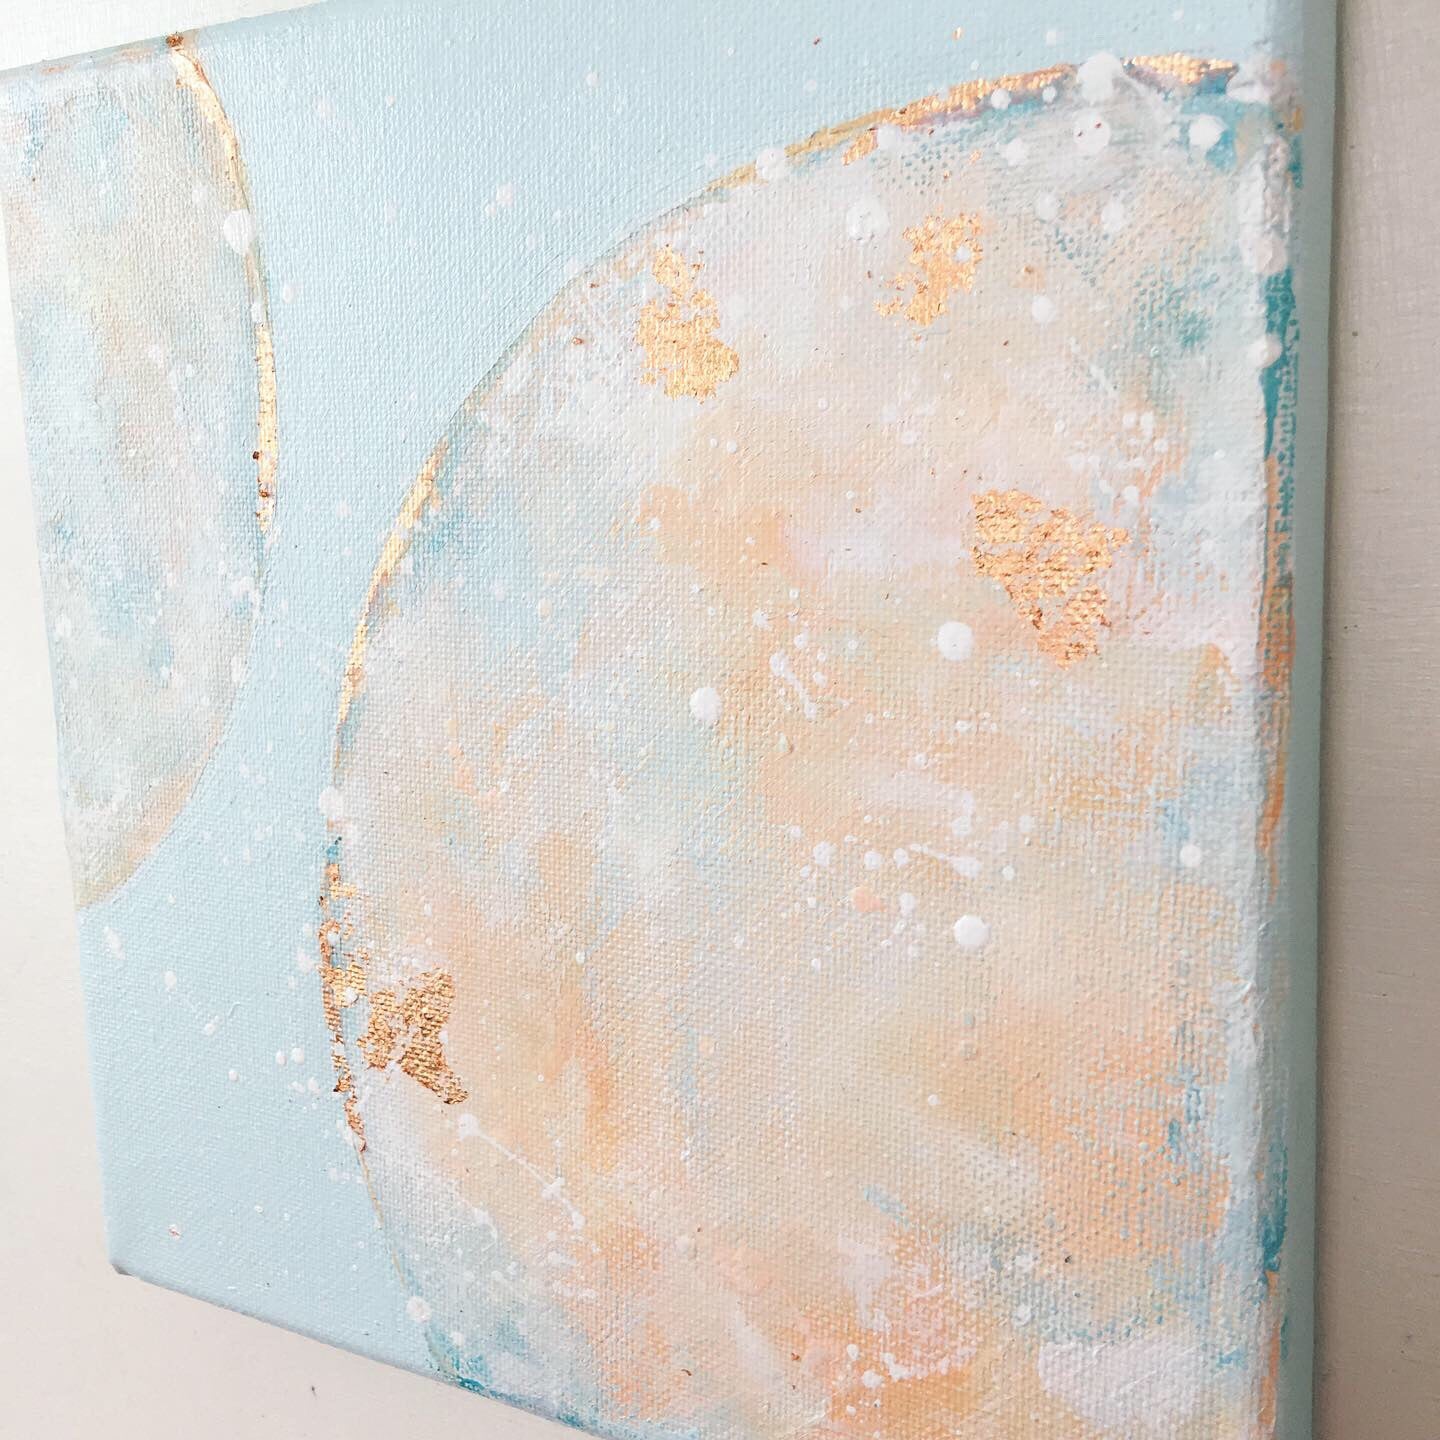 Moonscape #117 | Mer Lunaires Series | Abstract painting moon sky blue peach